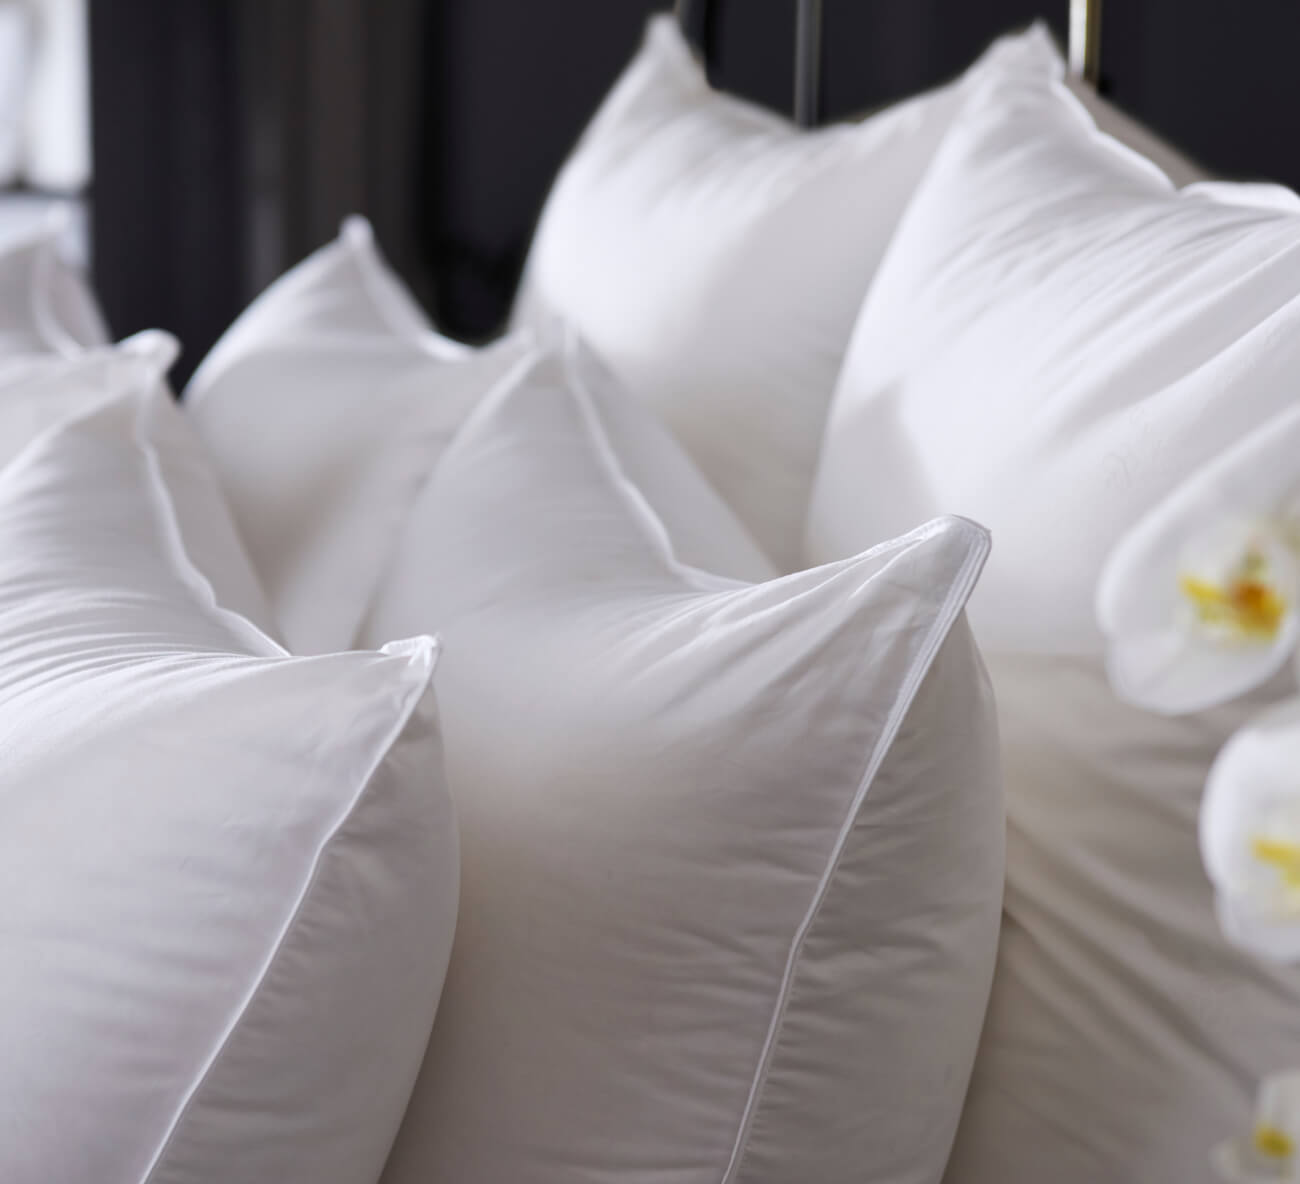 Scandia Down sleep pillows are utterly indulgent and comfortable